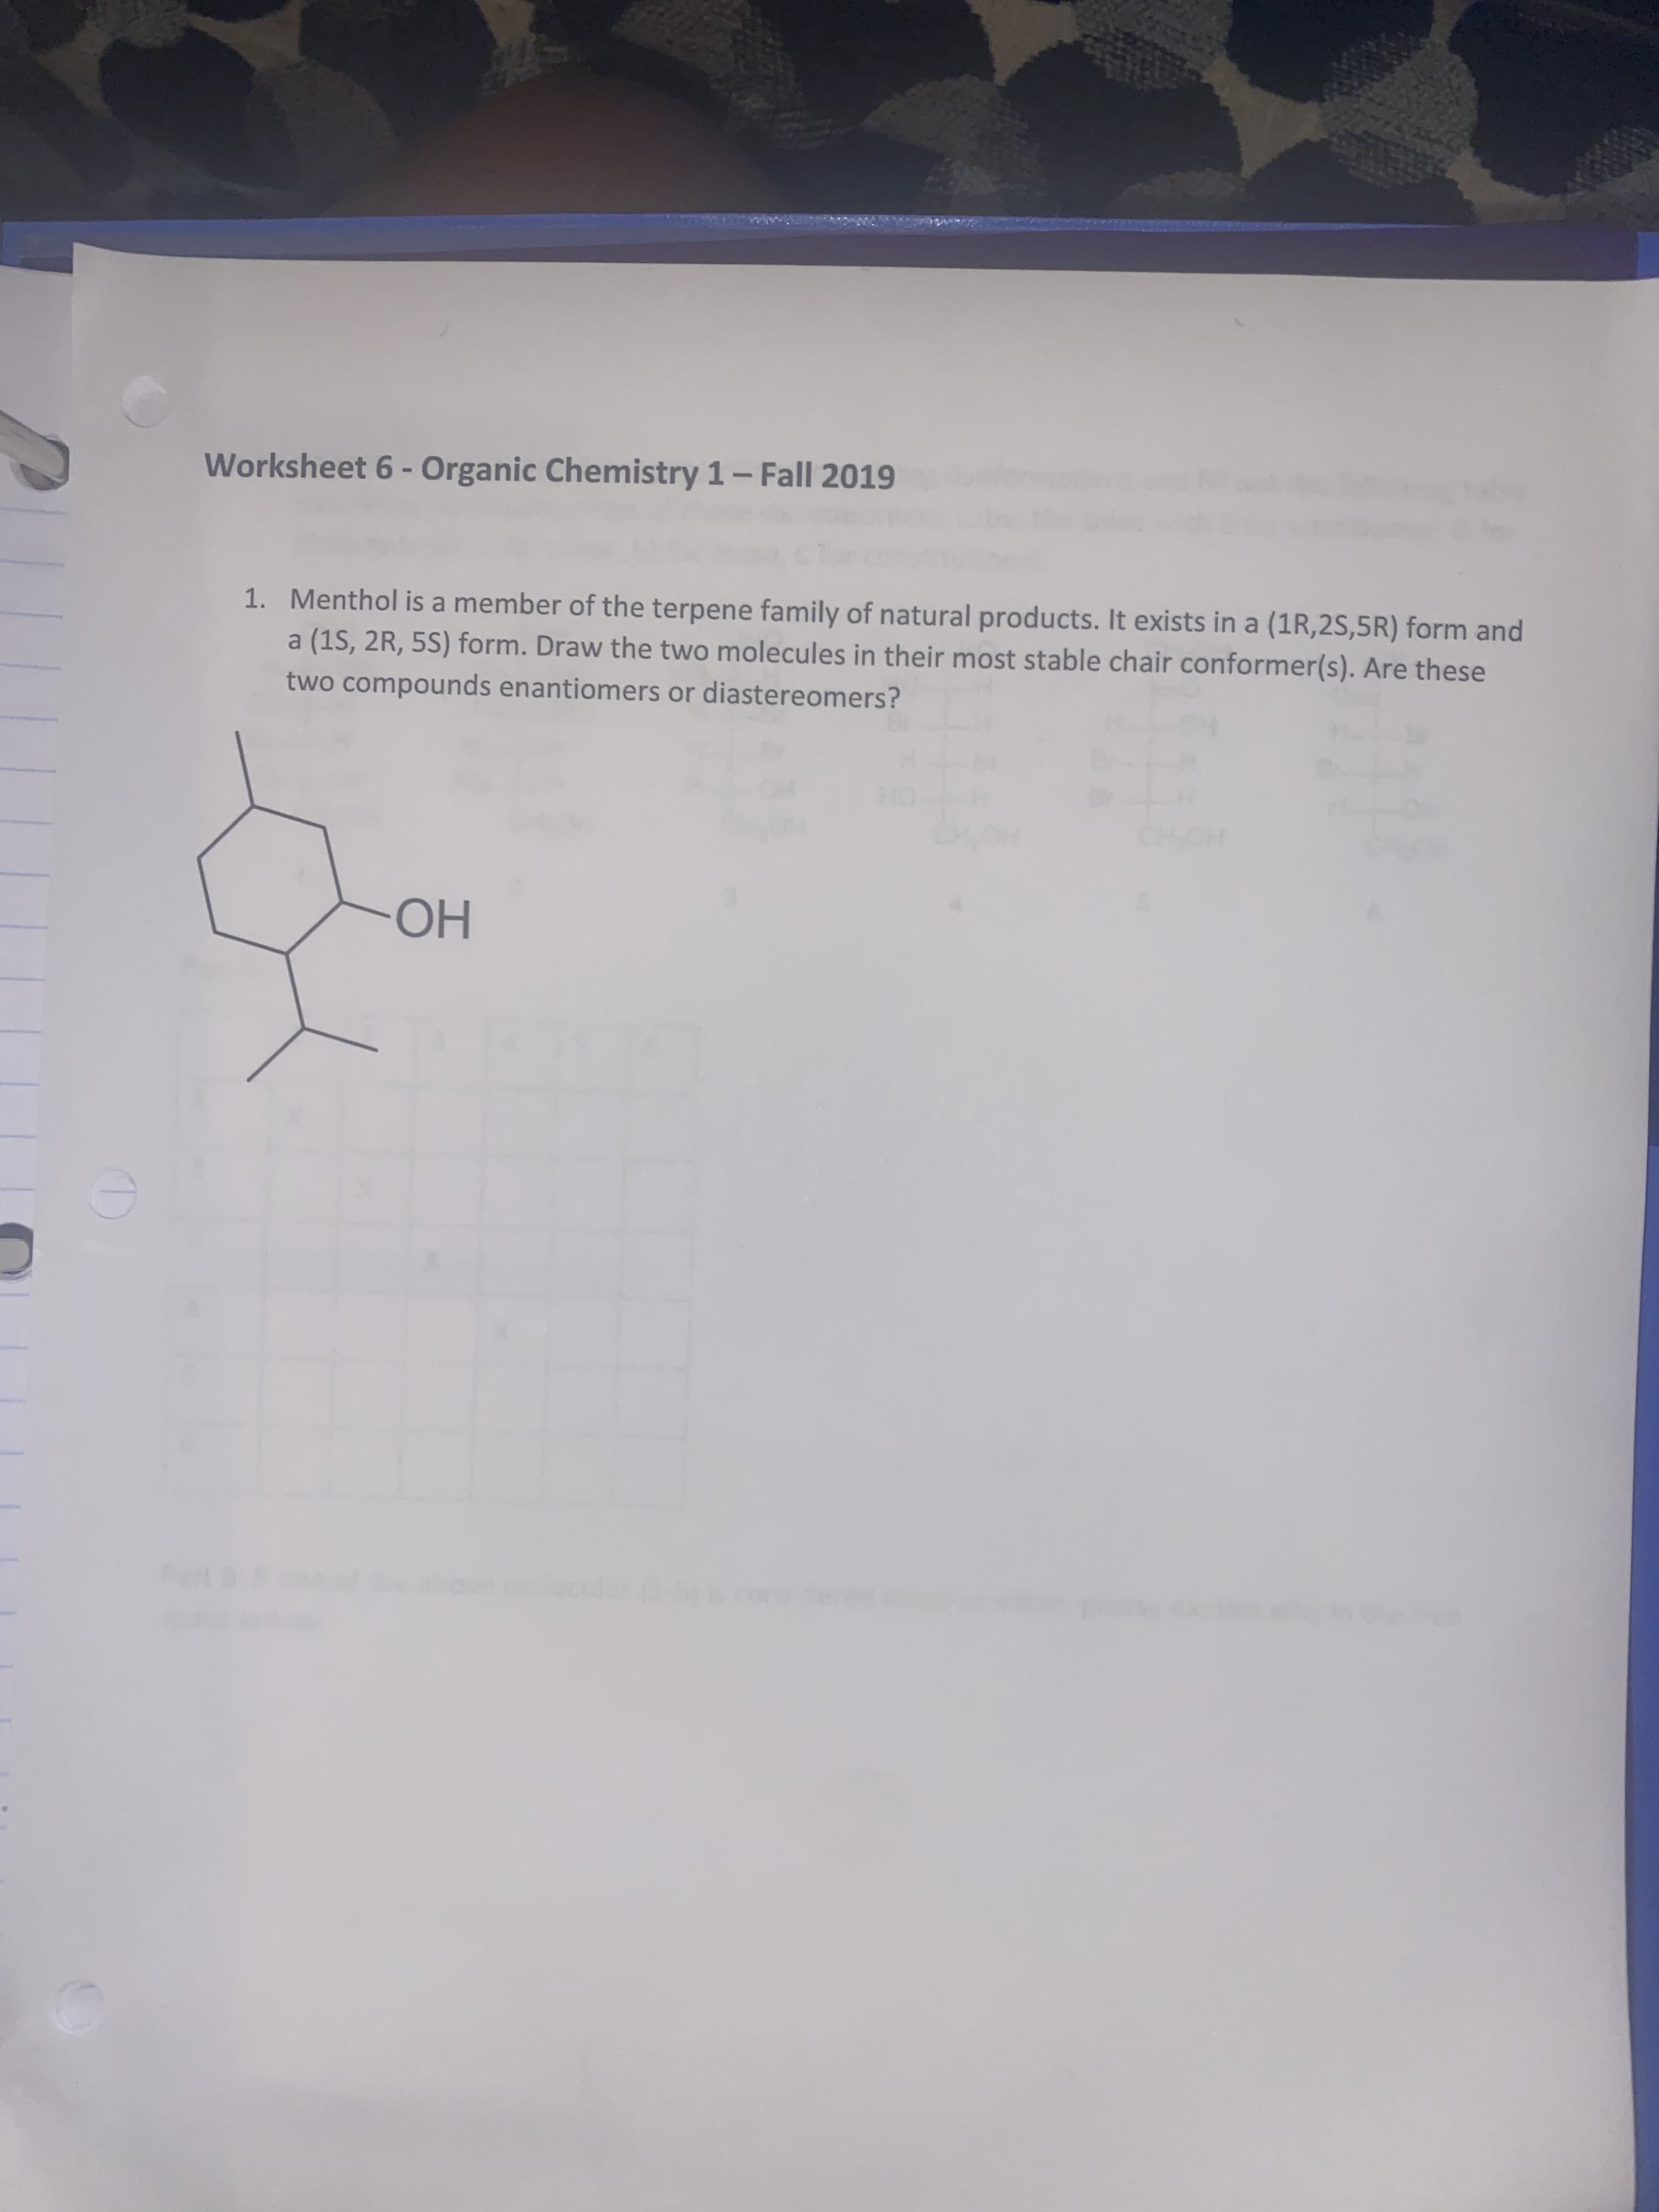 Worksheet 6- Organic Chemistry 1-Fall 2019
1. Menthol is a member of the terpene family of natural products. It exists in a (1R,2S,5R) form and
a (1S, 2R, 5S) form. Draw the two molecules in their most stable chair conformer(s). Are these
two compounds enantiomers or diastereomers?
HOHO
Но
